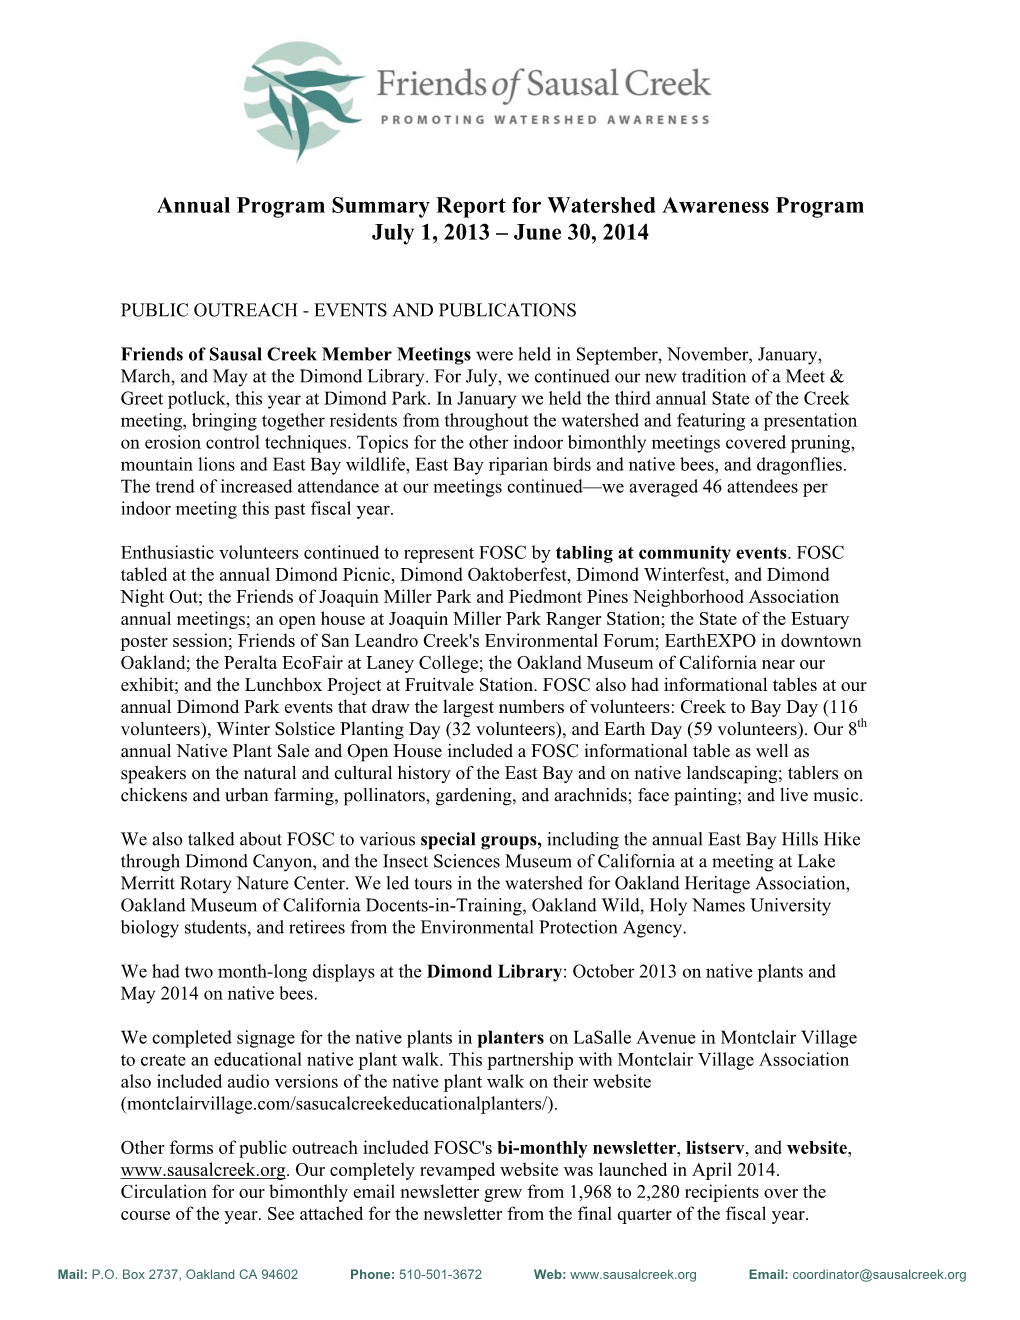 Annual Program Summary Report for Watershed Awareness Program July 1, 2013 – June 30, 2014